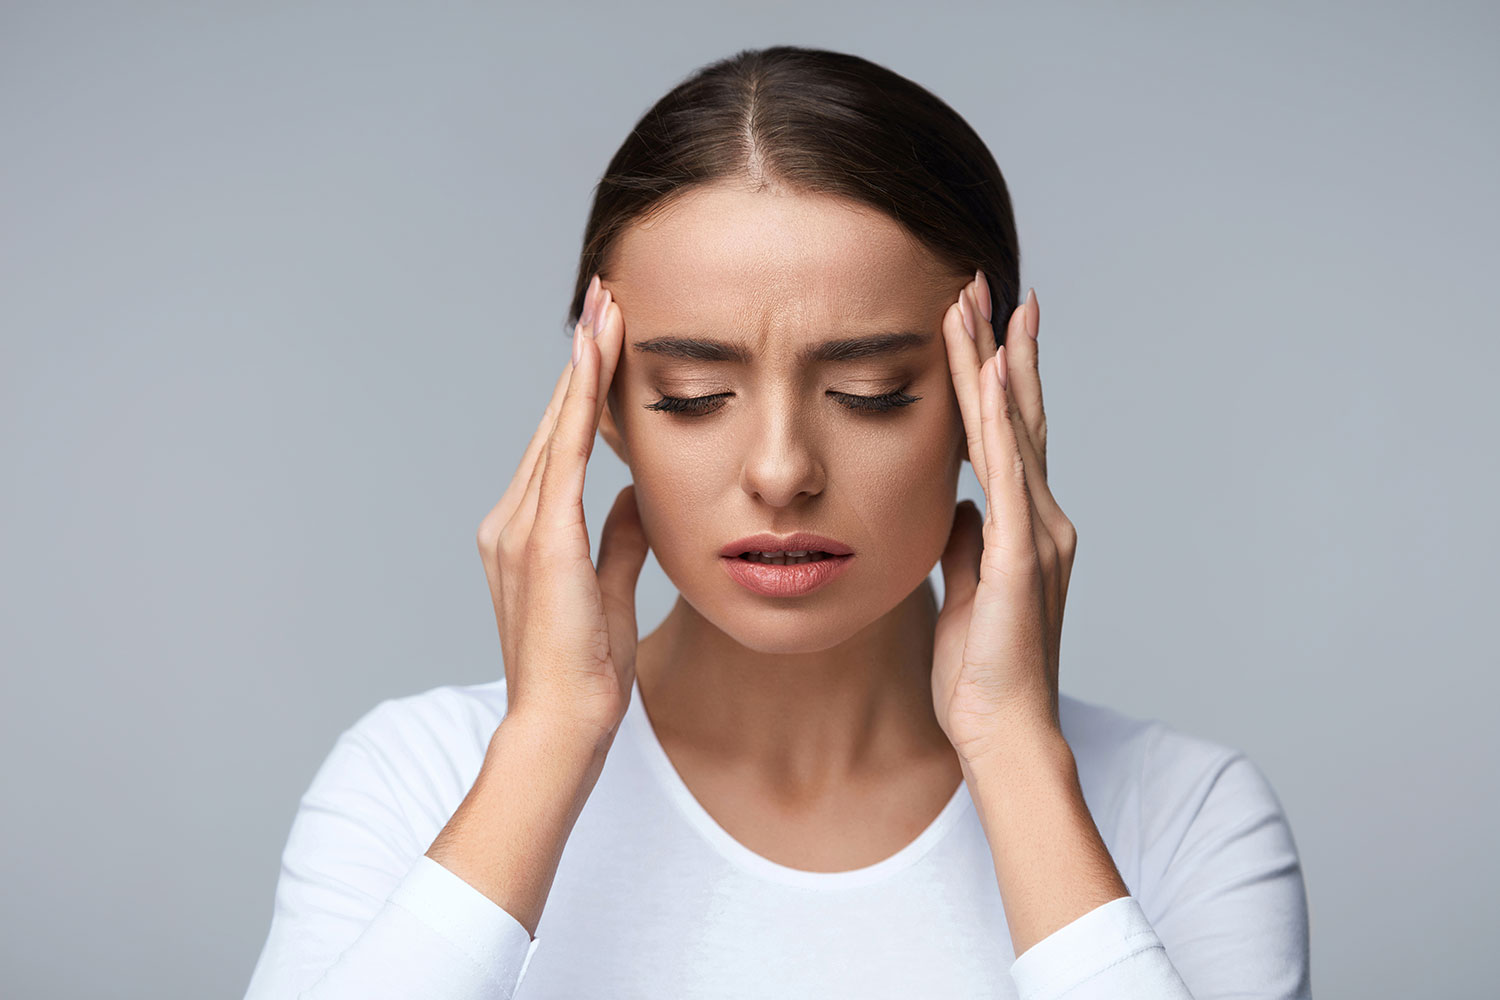 Yoga For Headaches 10 Best Poses for Migraine Relief